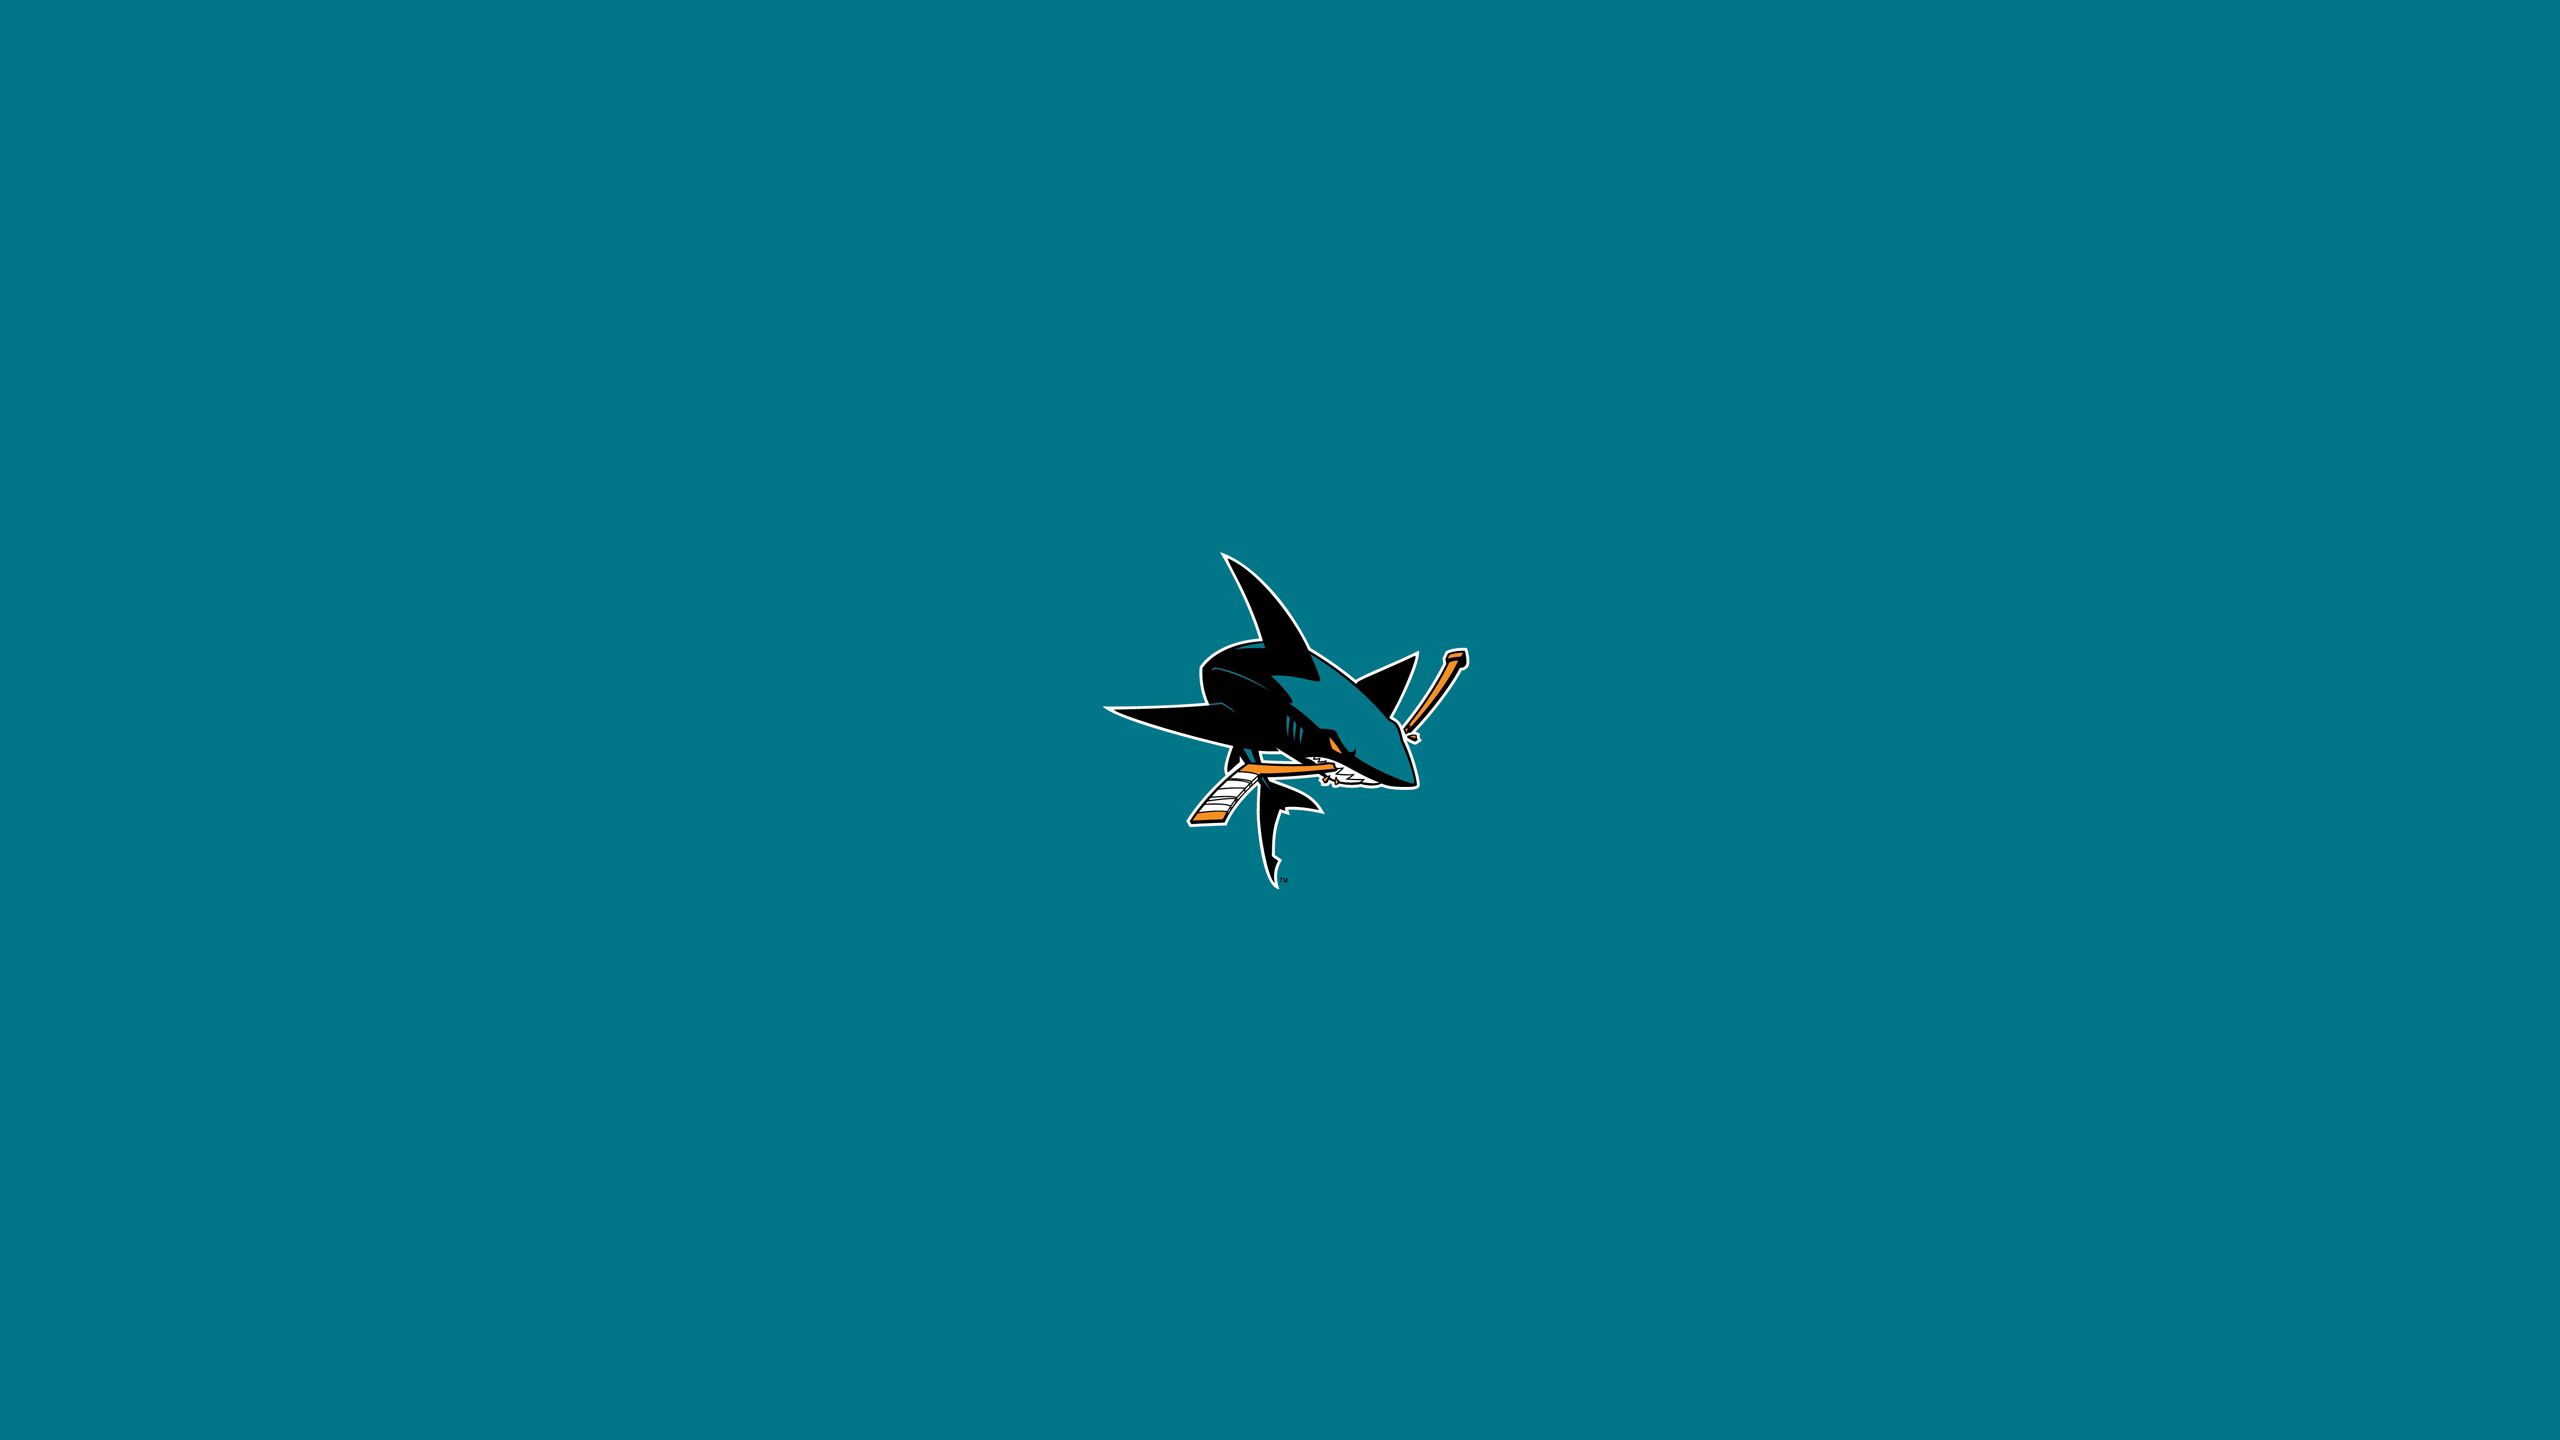 128398 free wallpaper 320x480 for phone, download images sports, logotype, san jose sharks, hockey 320x480 for mobile